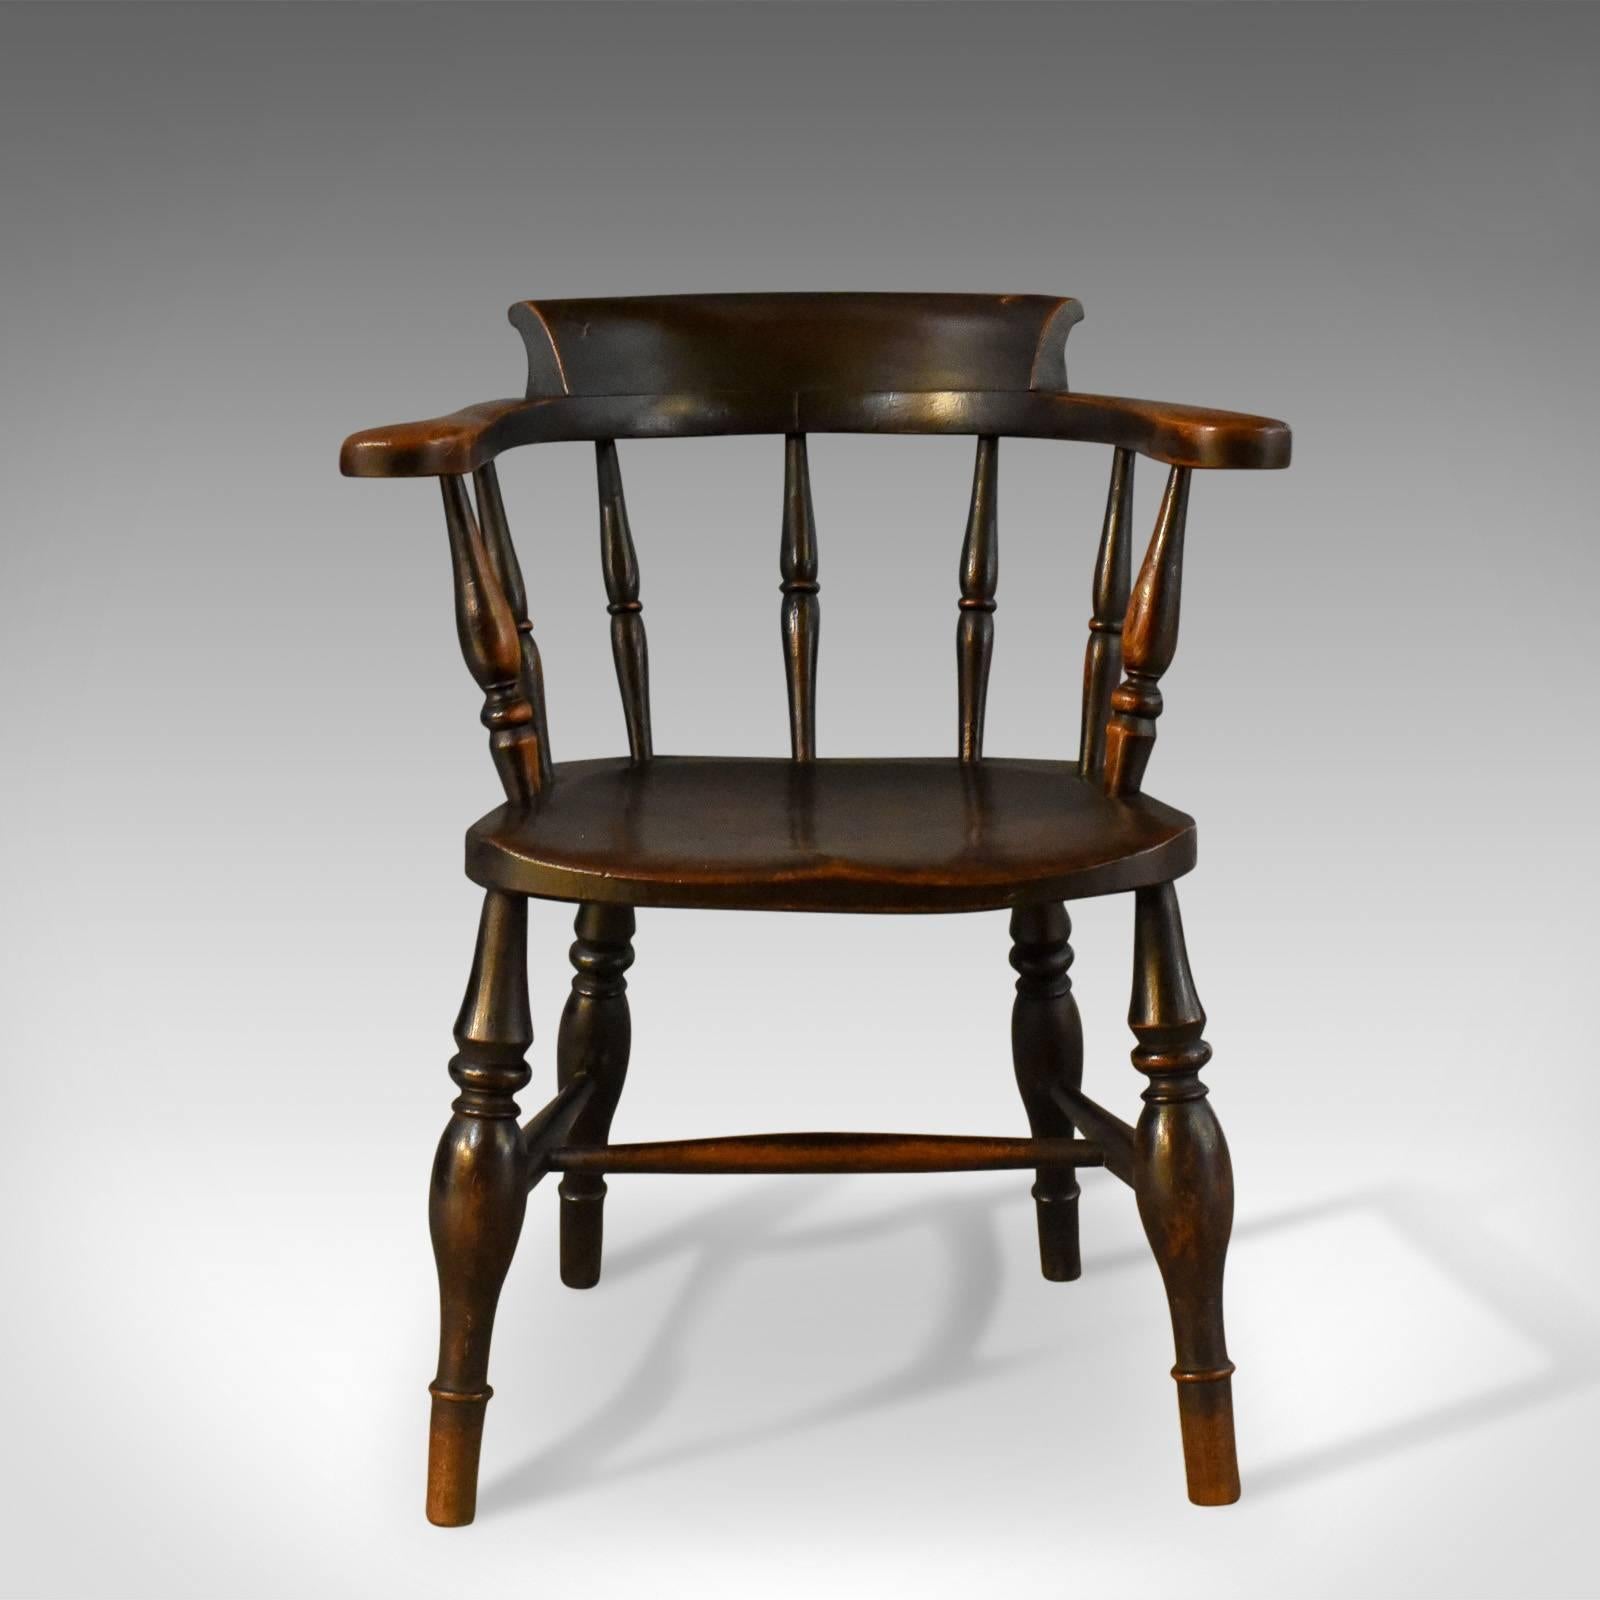 This is an antique, bow-back chair, sometimes referred to as a 'Smokers' or 'Captain's' chair. An English, Victorian elm Windsor piece from the mid 19th century c.1870. 

Attractive deep, rich tones to the elm with a desirable aged